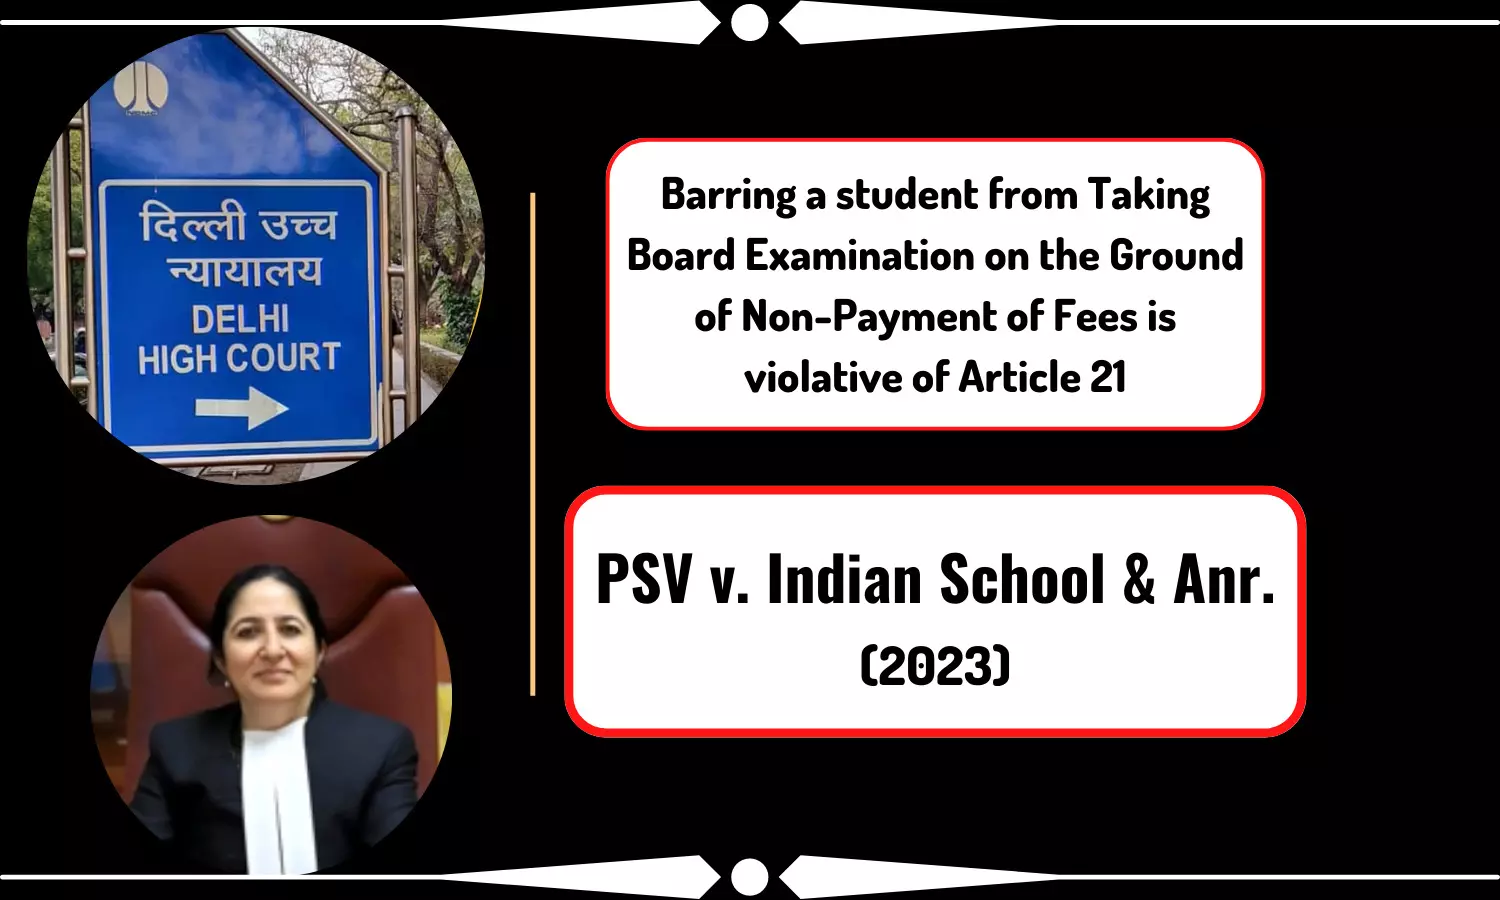 Case Analysis: PSV v. Indian School & Anr., (2023) | Barring a student from Taking Board Examination on the Ground of Non-Payment of Fees is violative of Article 21